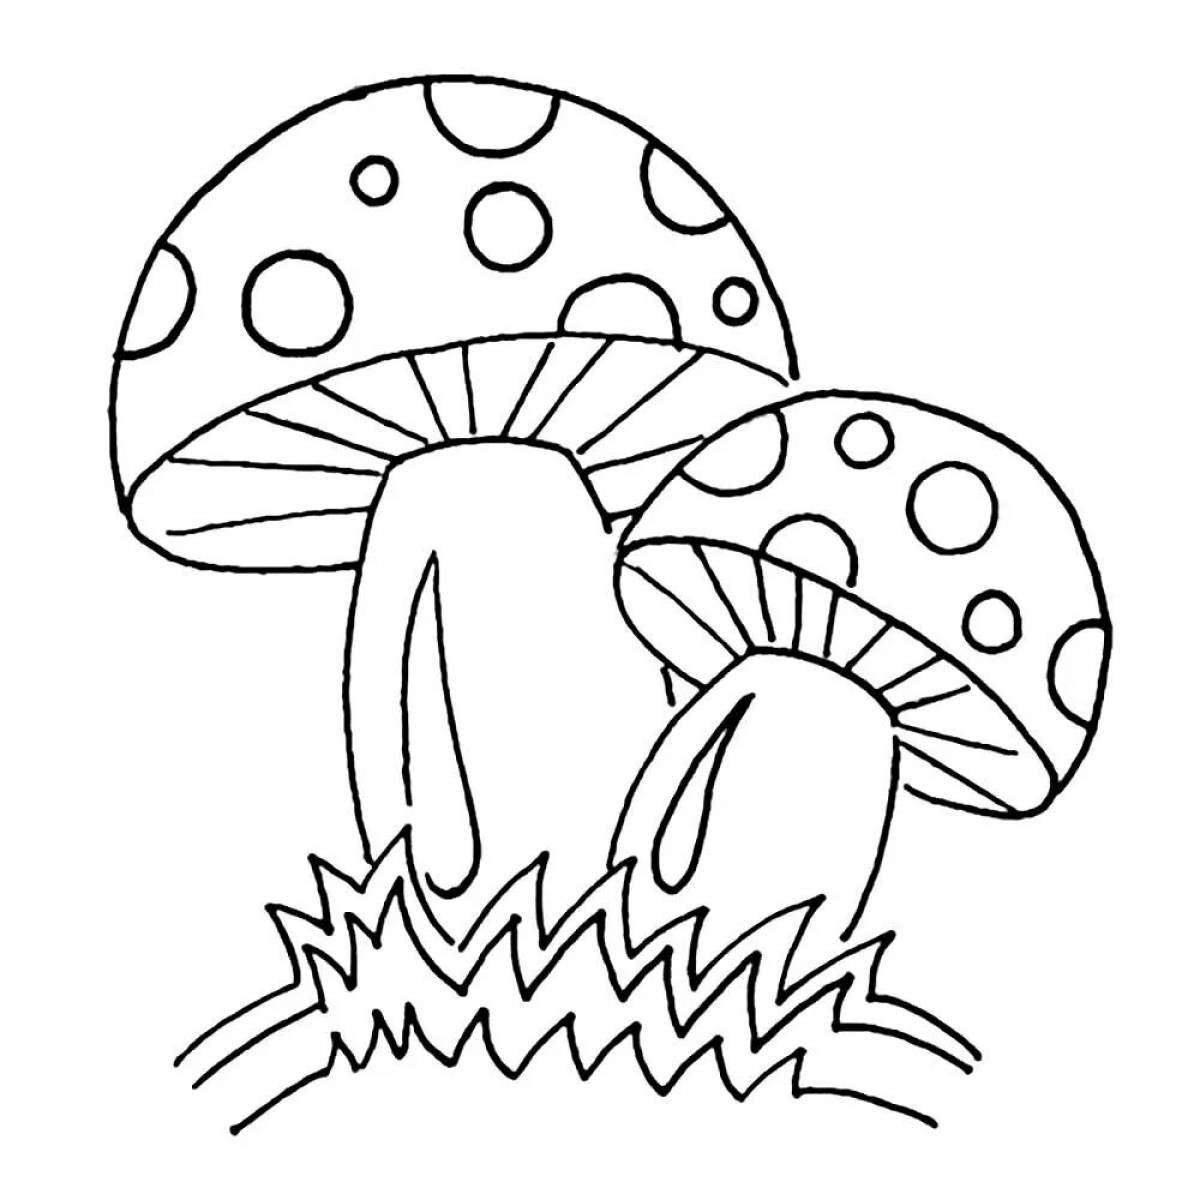 Unforgettable fly agaric coloring book for kids